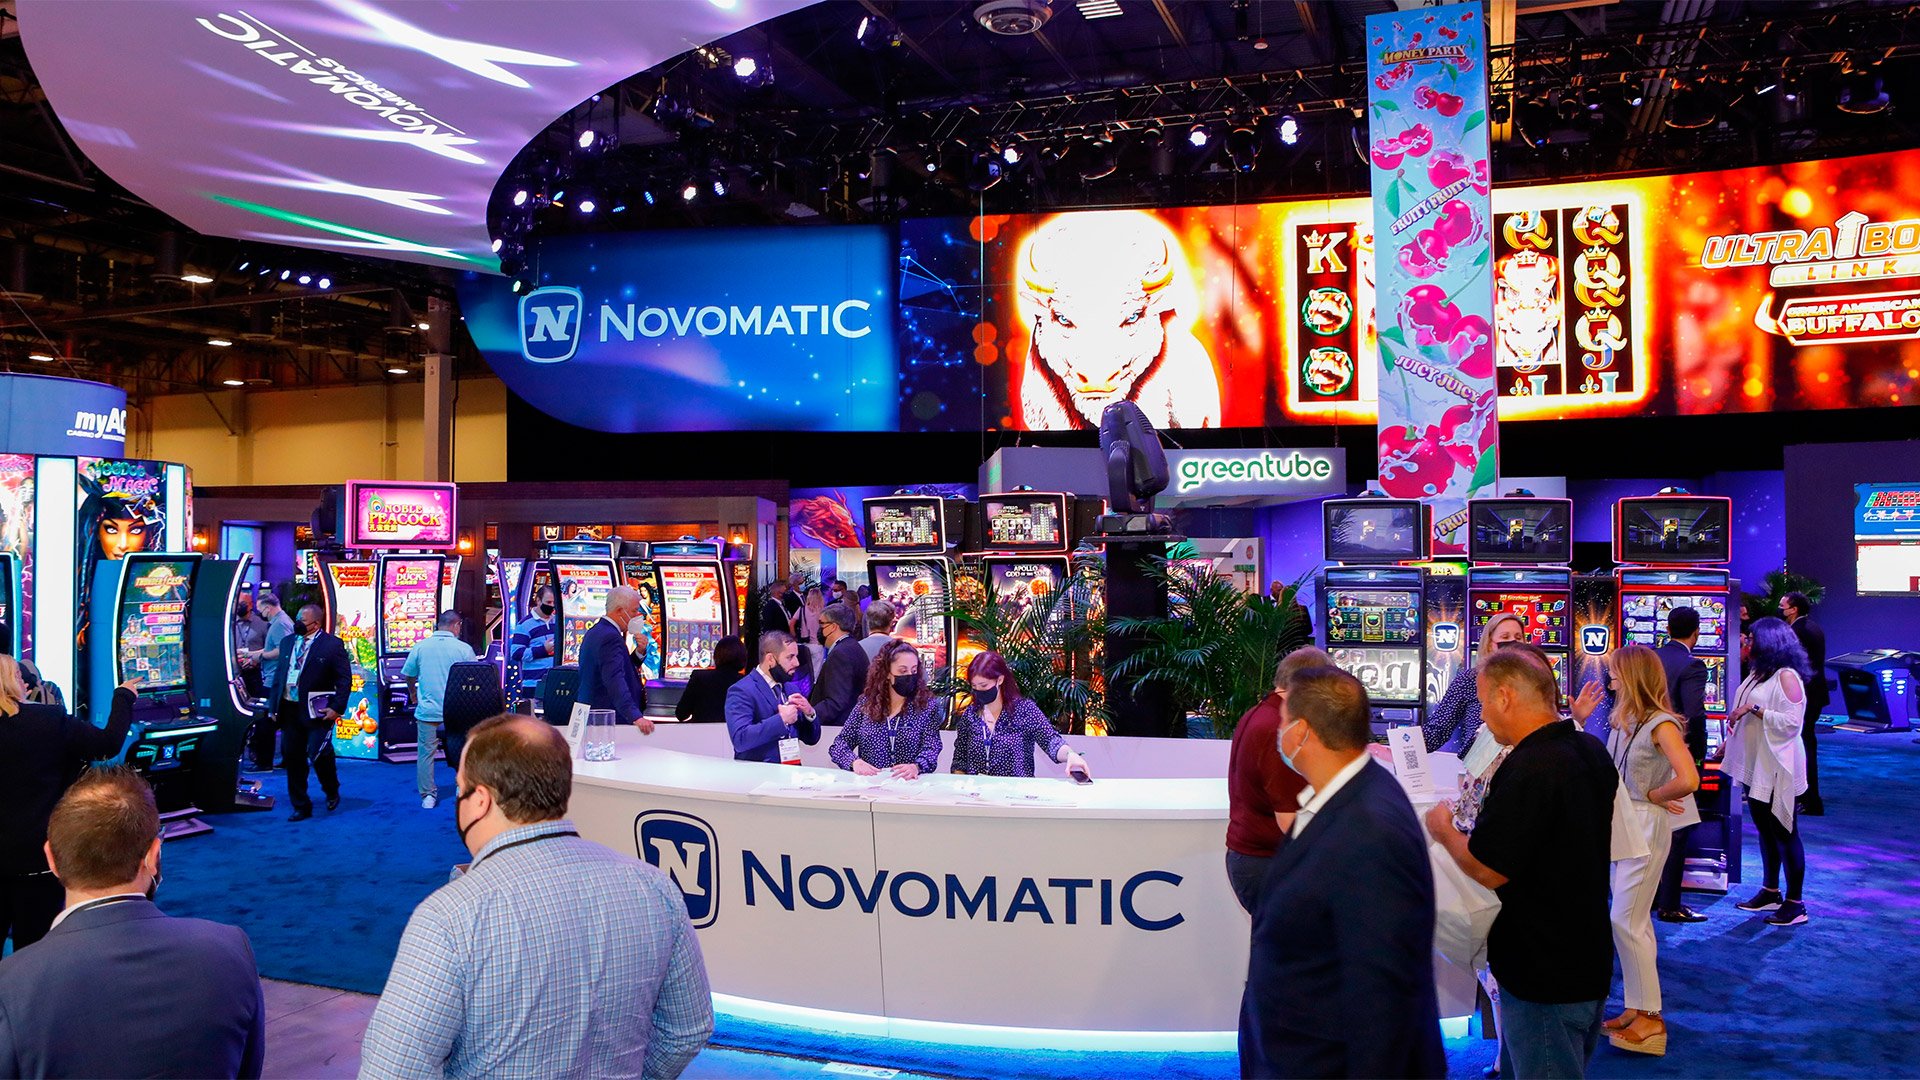 “Novomatic’s primary strategy for G2E Las Vegas is to present our full portfolio of premium gaming products and solutions”